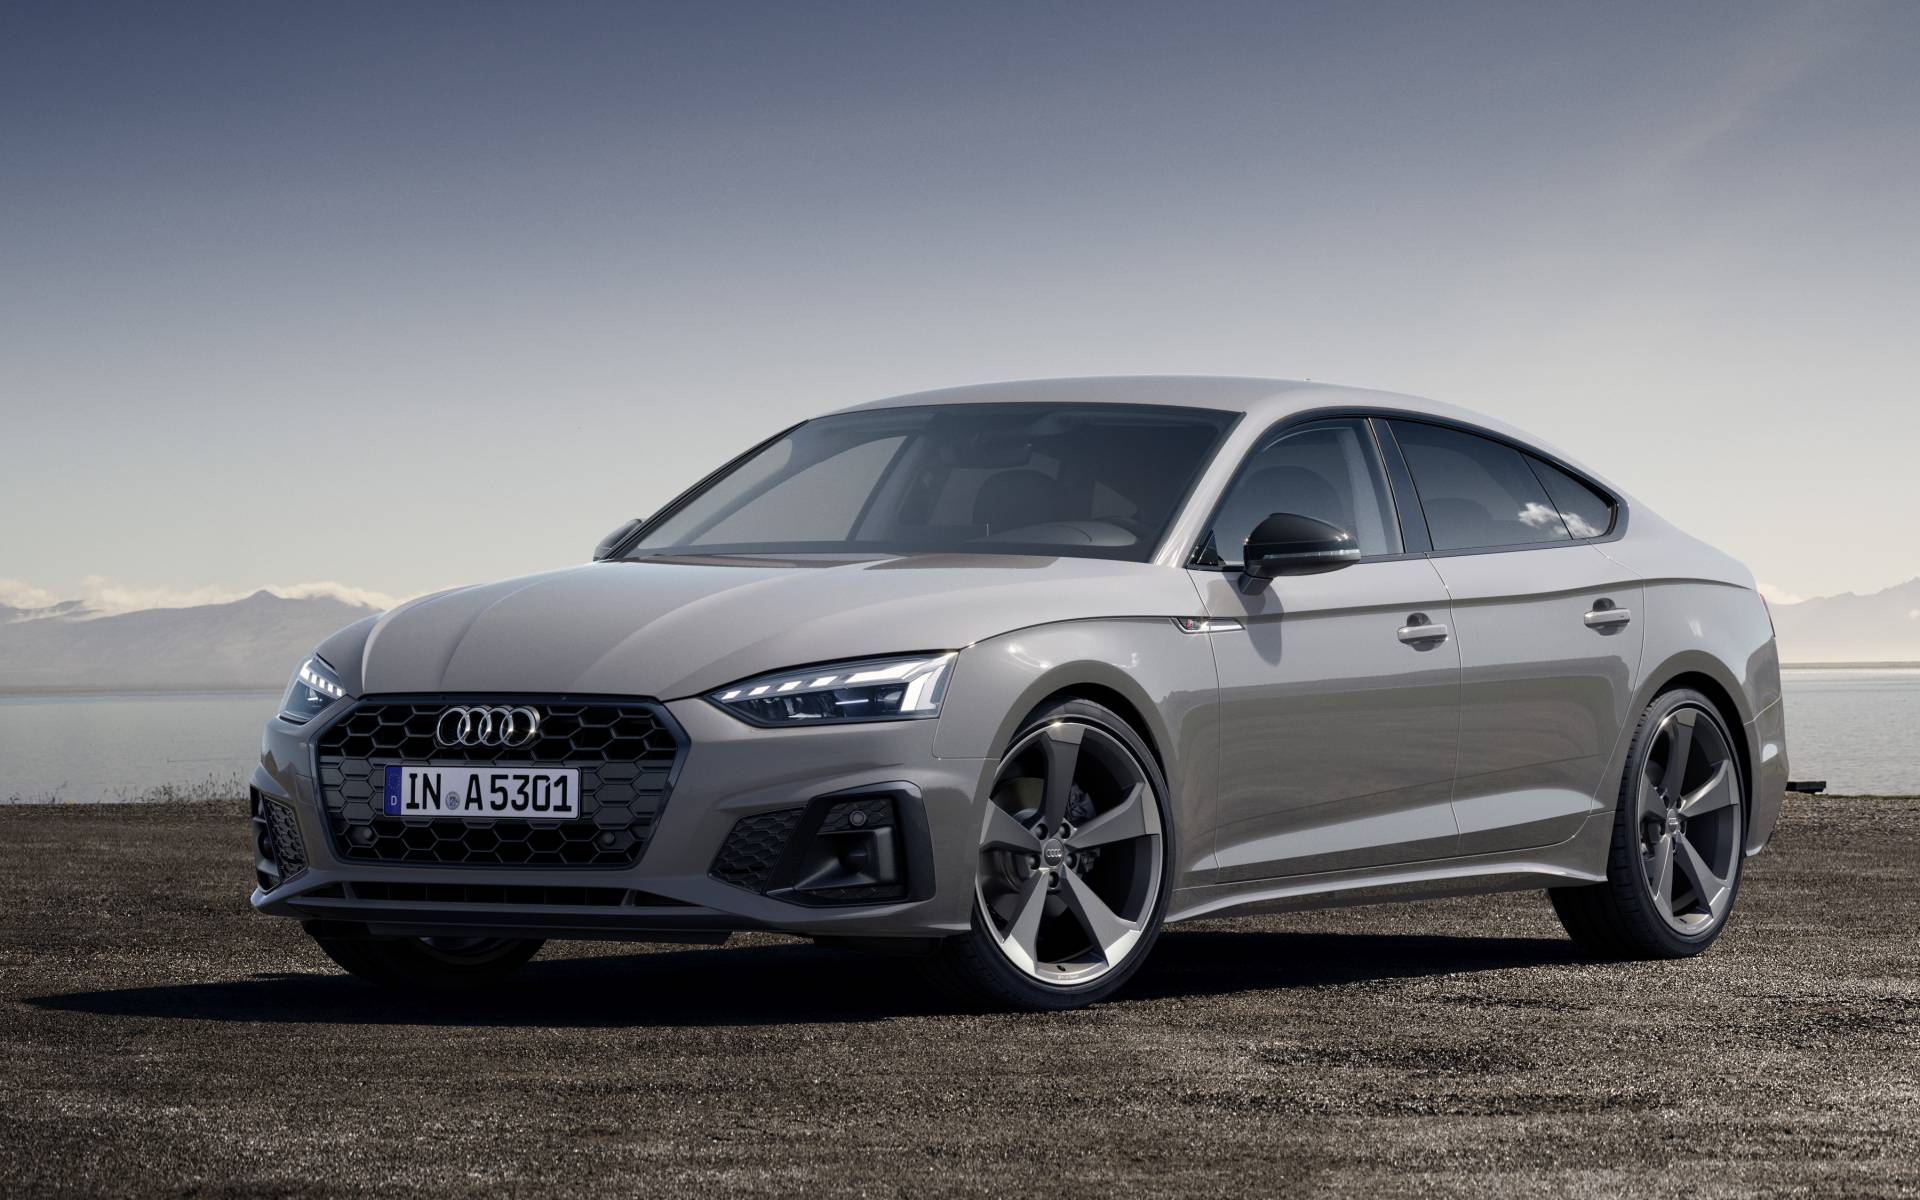 2020 Audi A5 - News, reviews, picture galleries and videos - The Car Guide